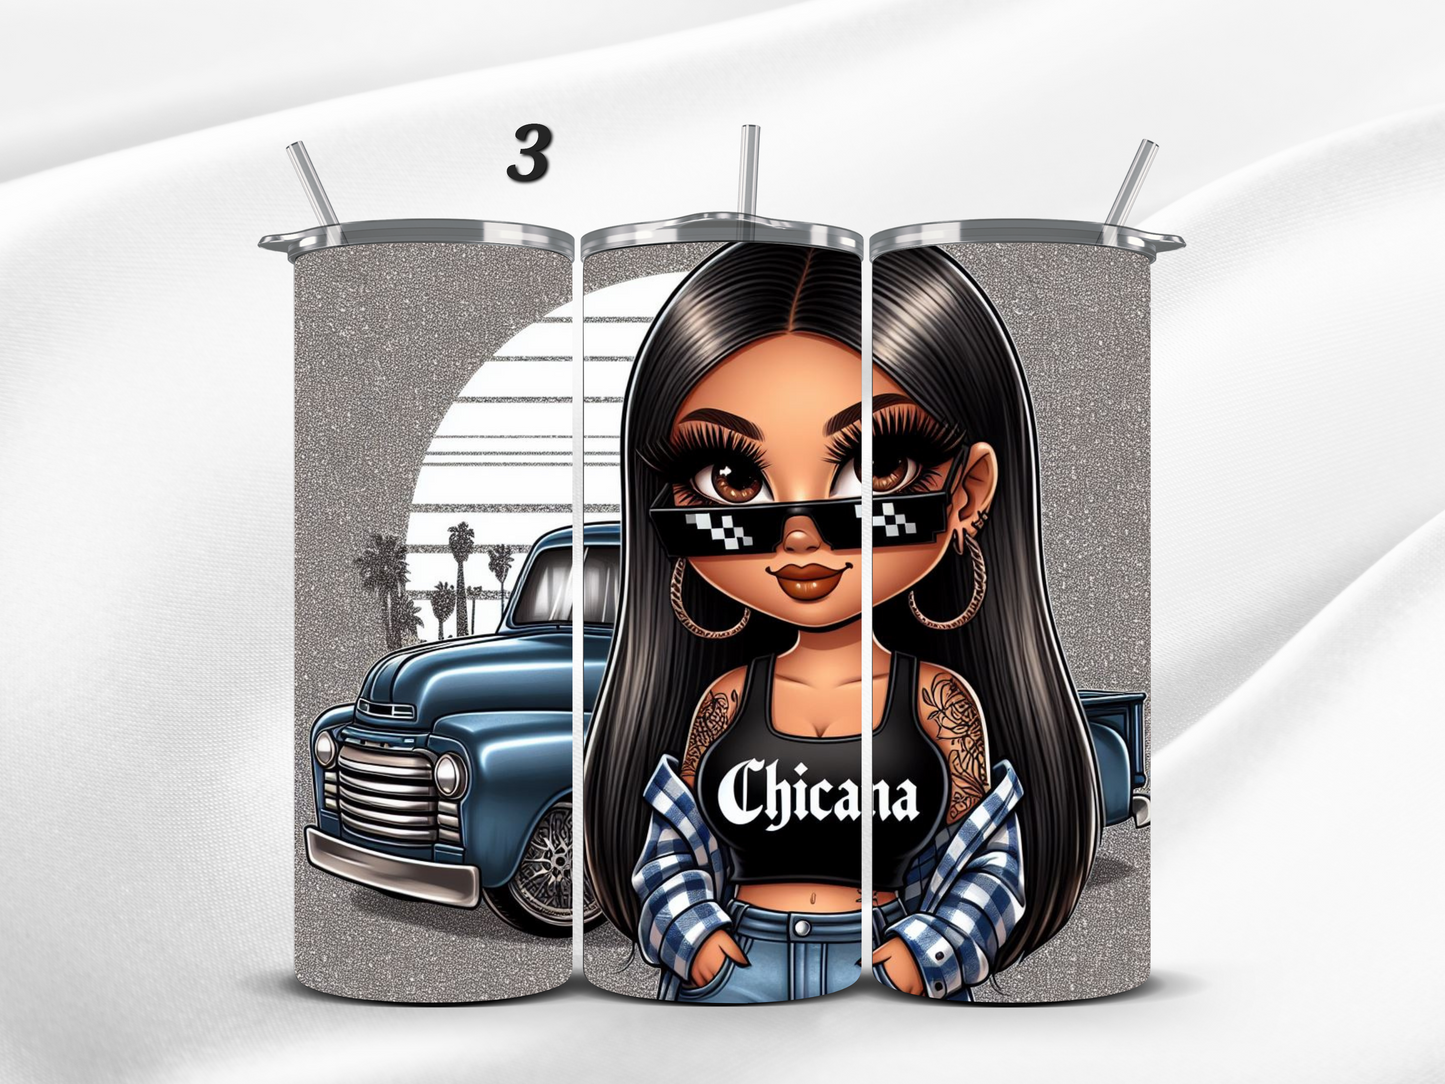 Chicana Style (options #'s 1-25)